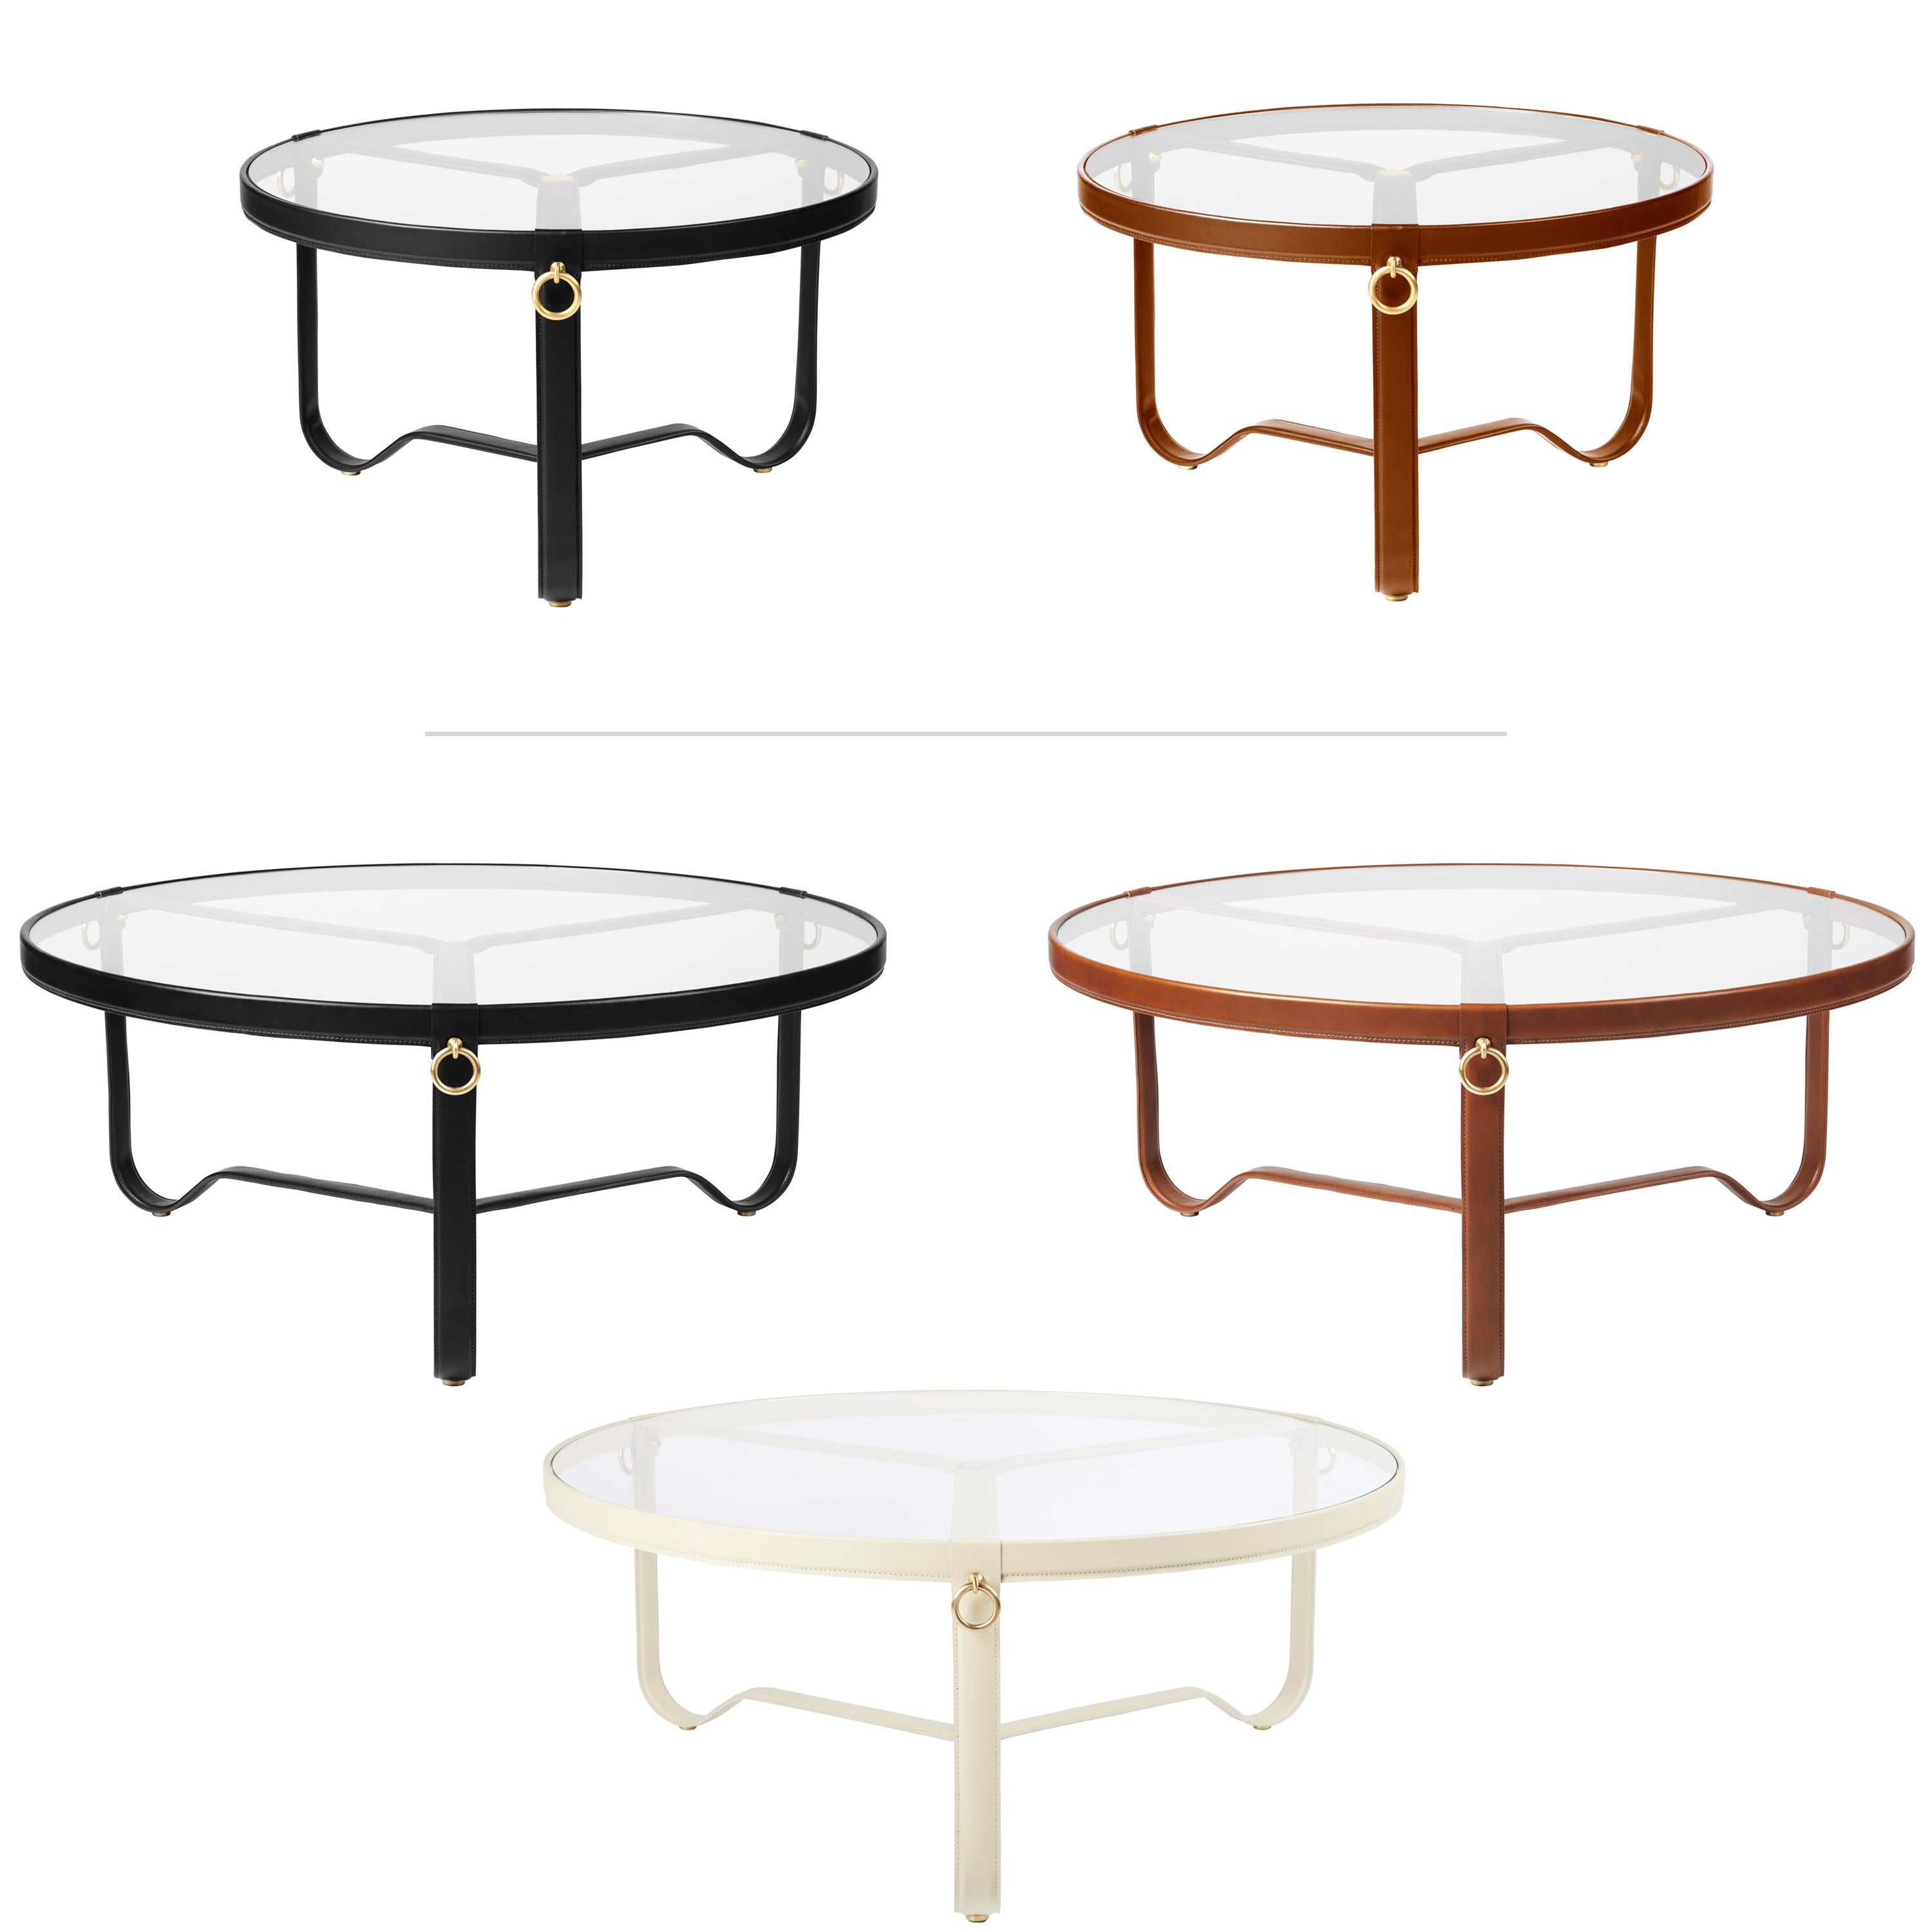 Contemporary Jacques Adnet 'Circulaire' Glass and Black Leather Coffee or Side Table for GUBI For Sale